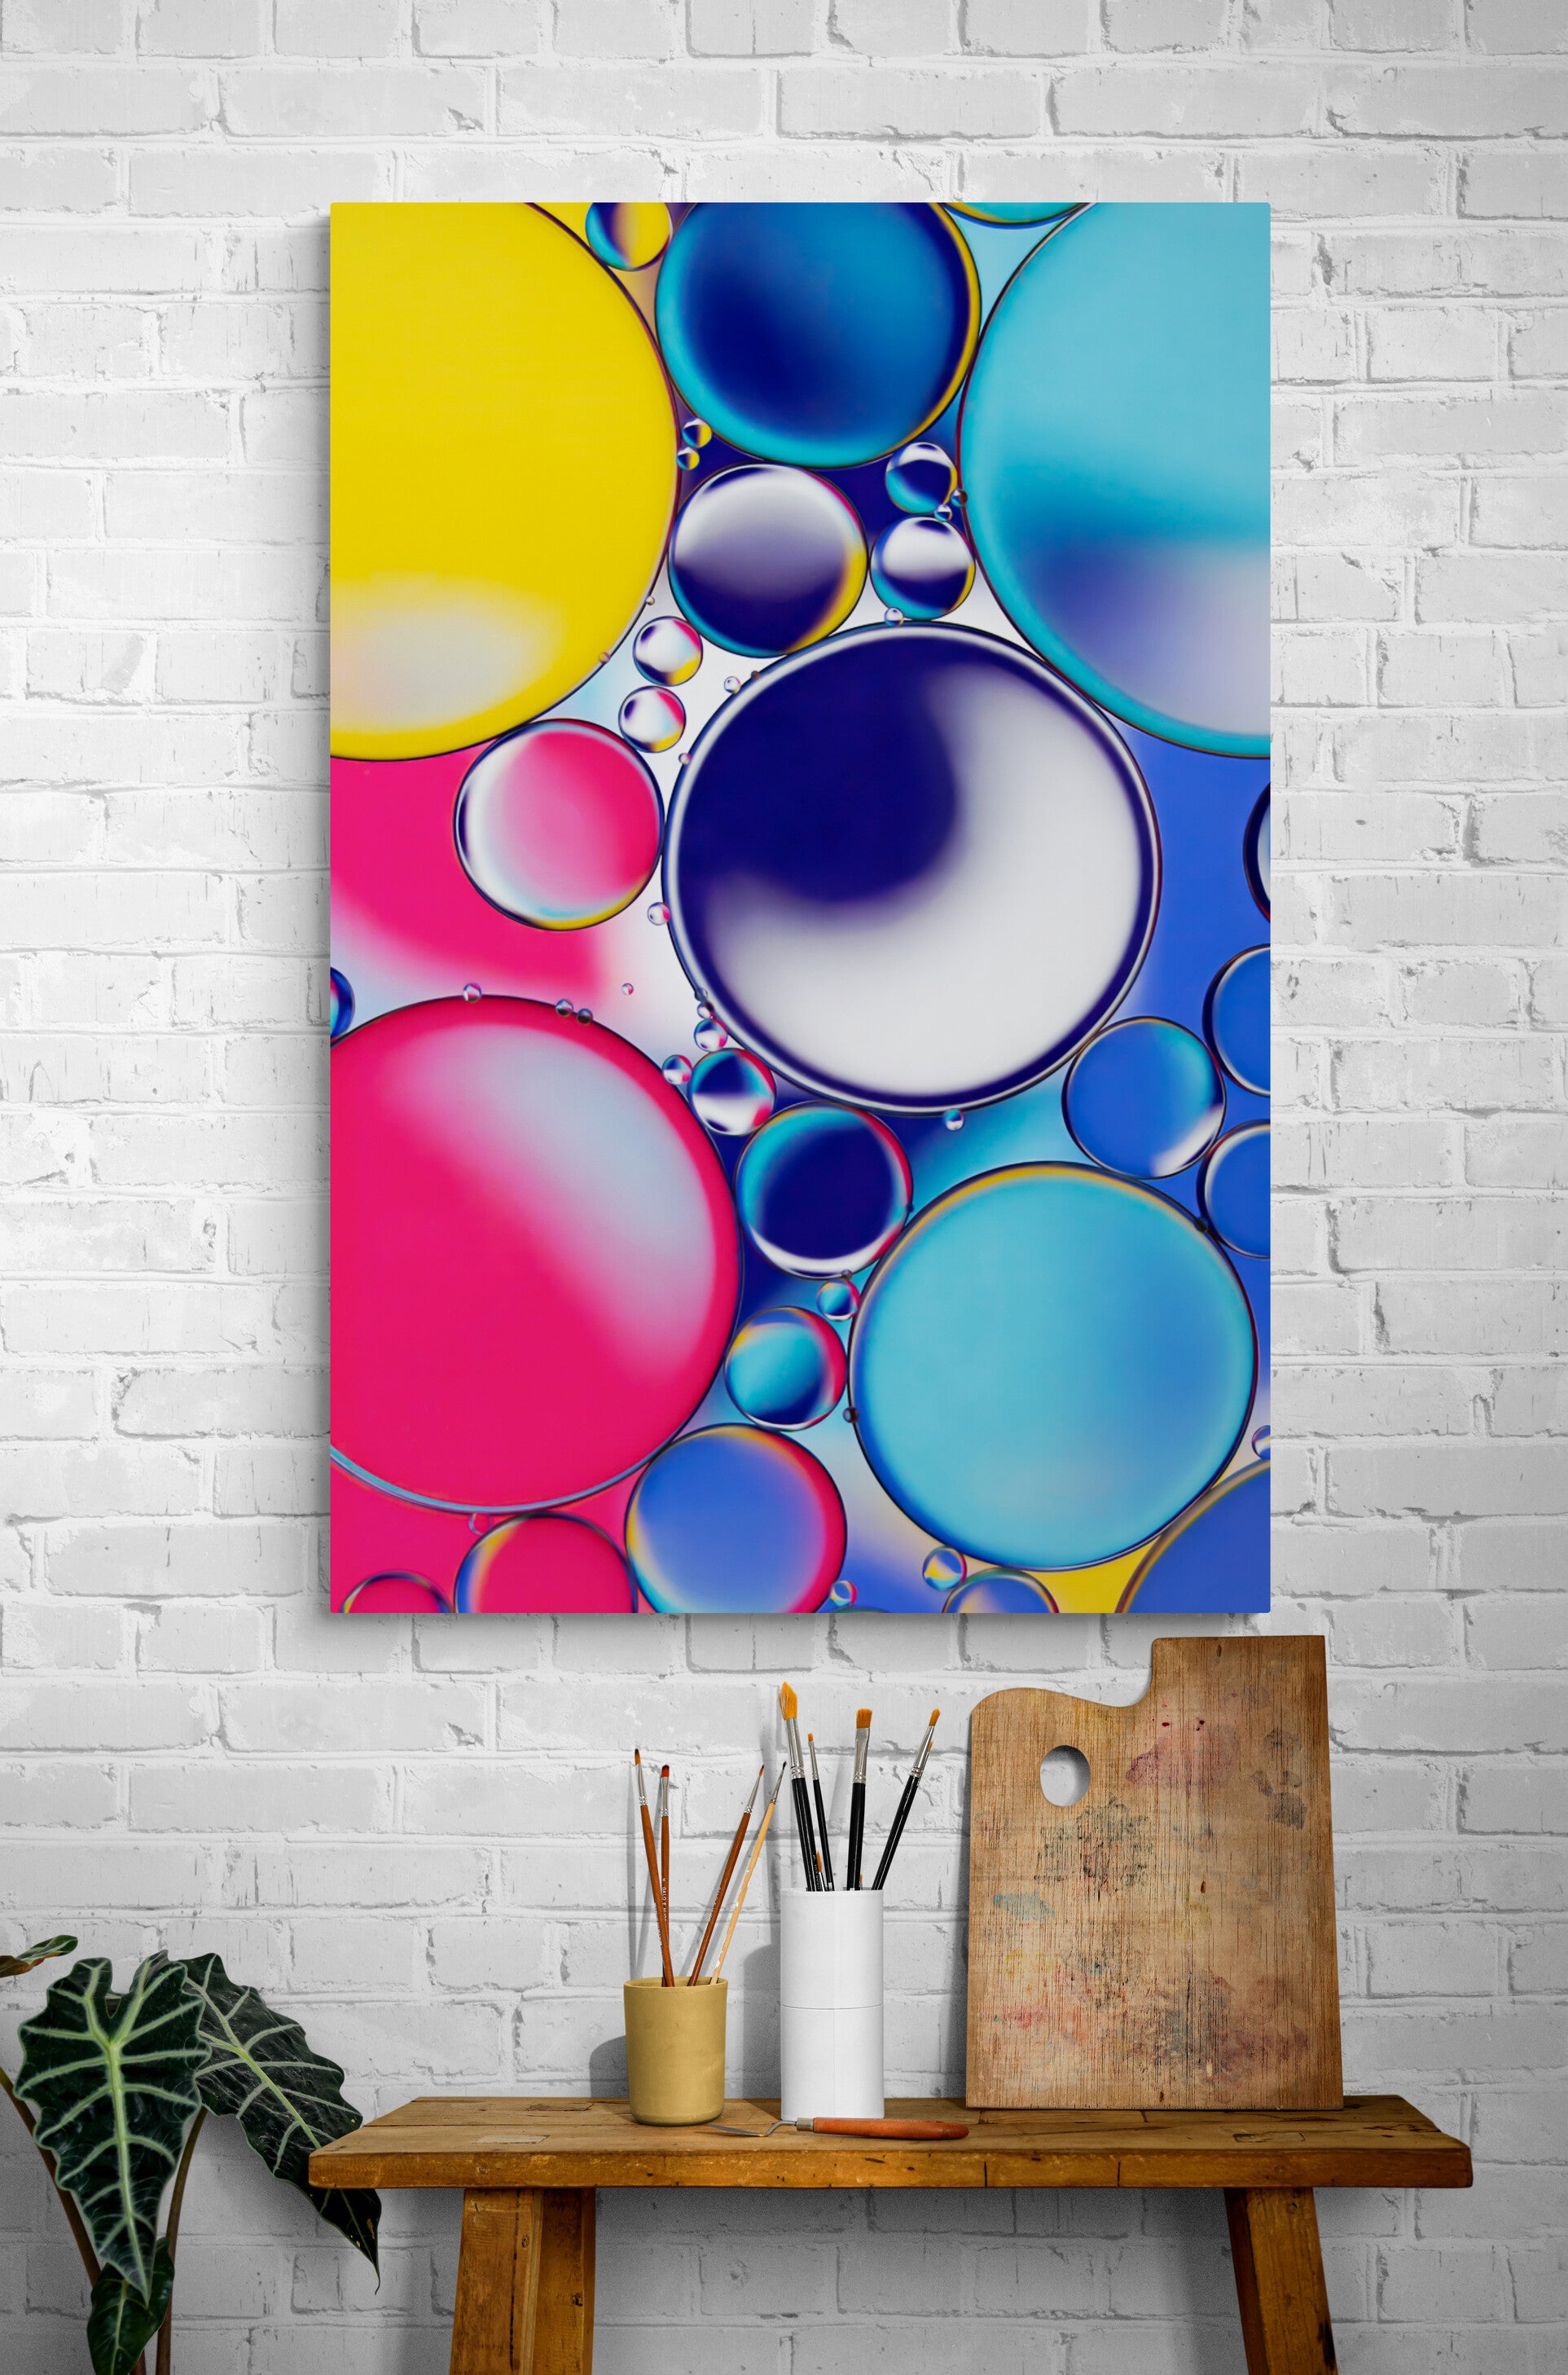 Abstract acrylic print titled 'School Daze.' Features a macro view of oil and water creating a colorful, psychedelic pattern. The image showcases a mix of vibrant colors and fluid shapes, symbolizing modern creativity. Ideal as unique, contemporary wall art for various spaces.